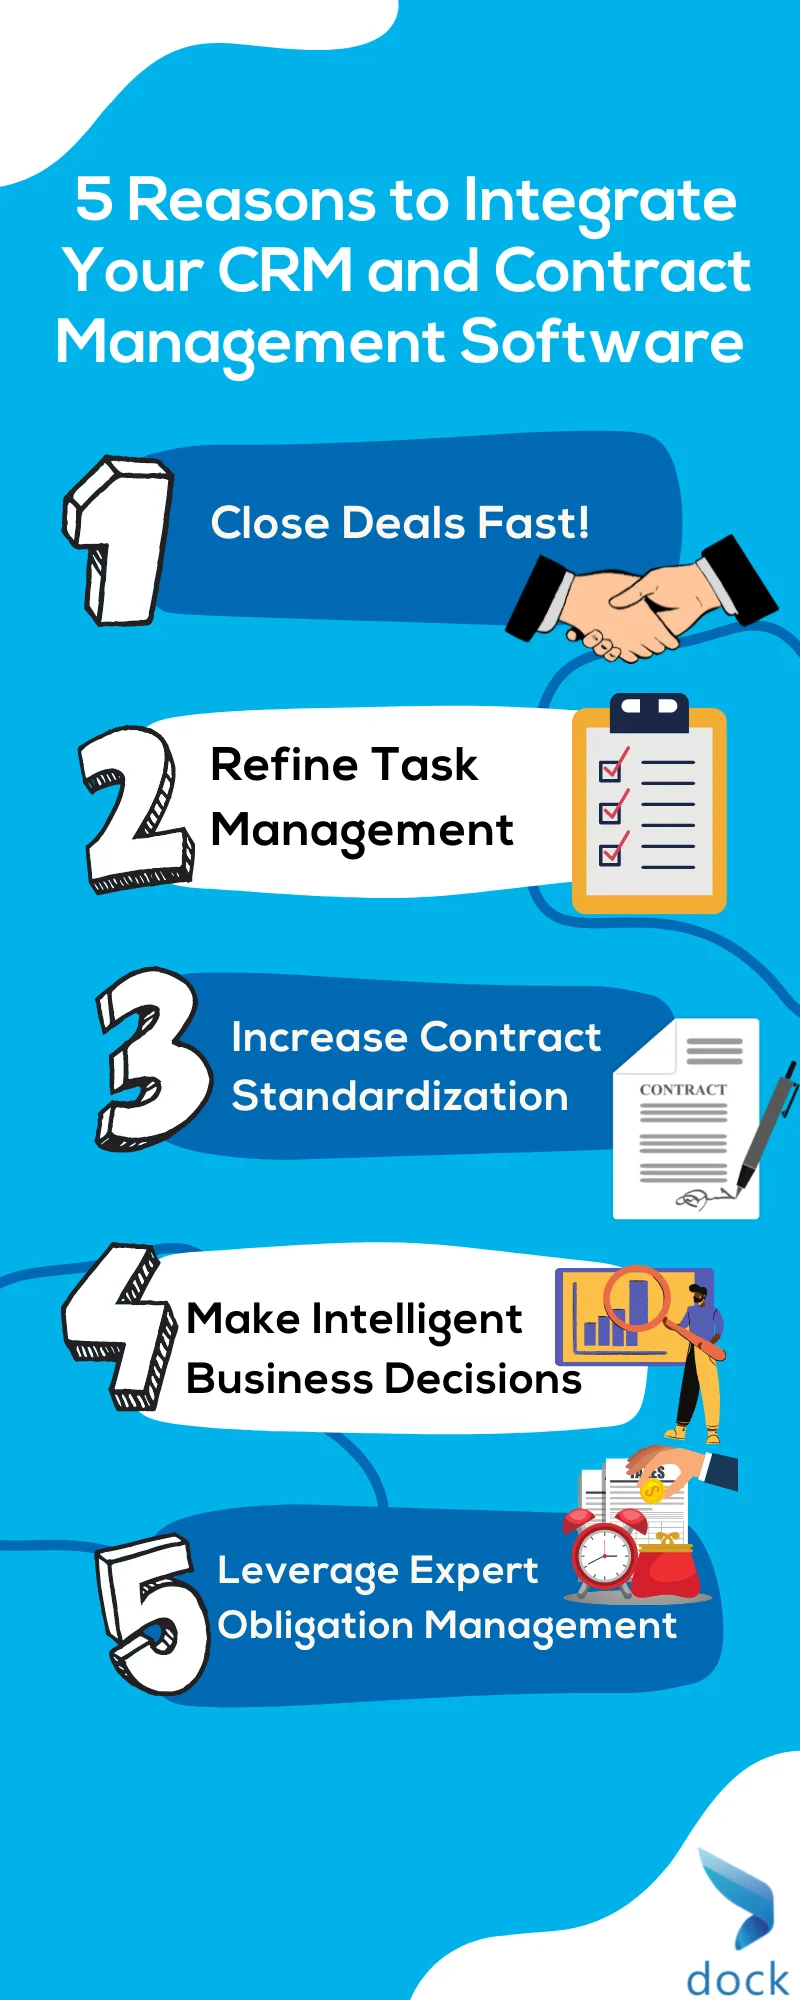 5 Reasons to Integrate Your CRM and Contract Management Software  (1)